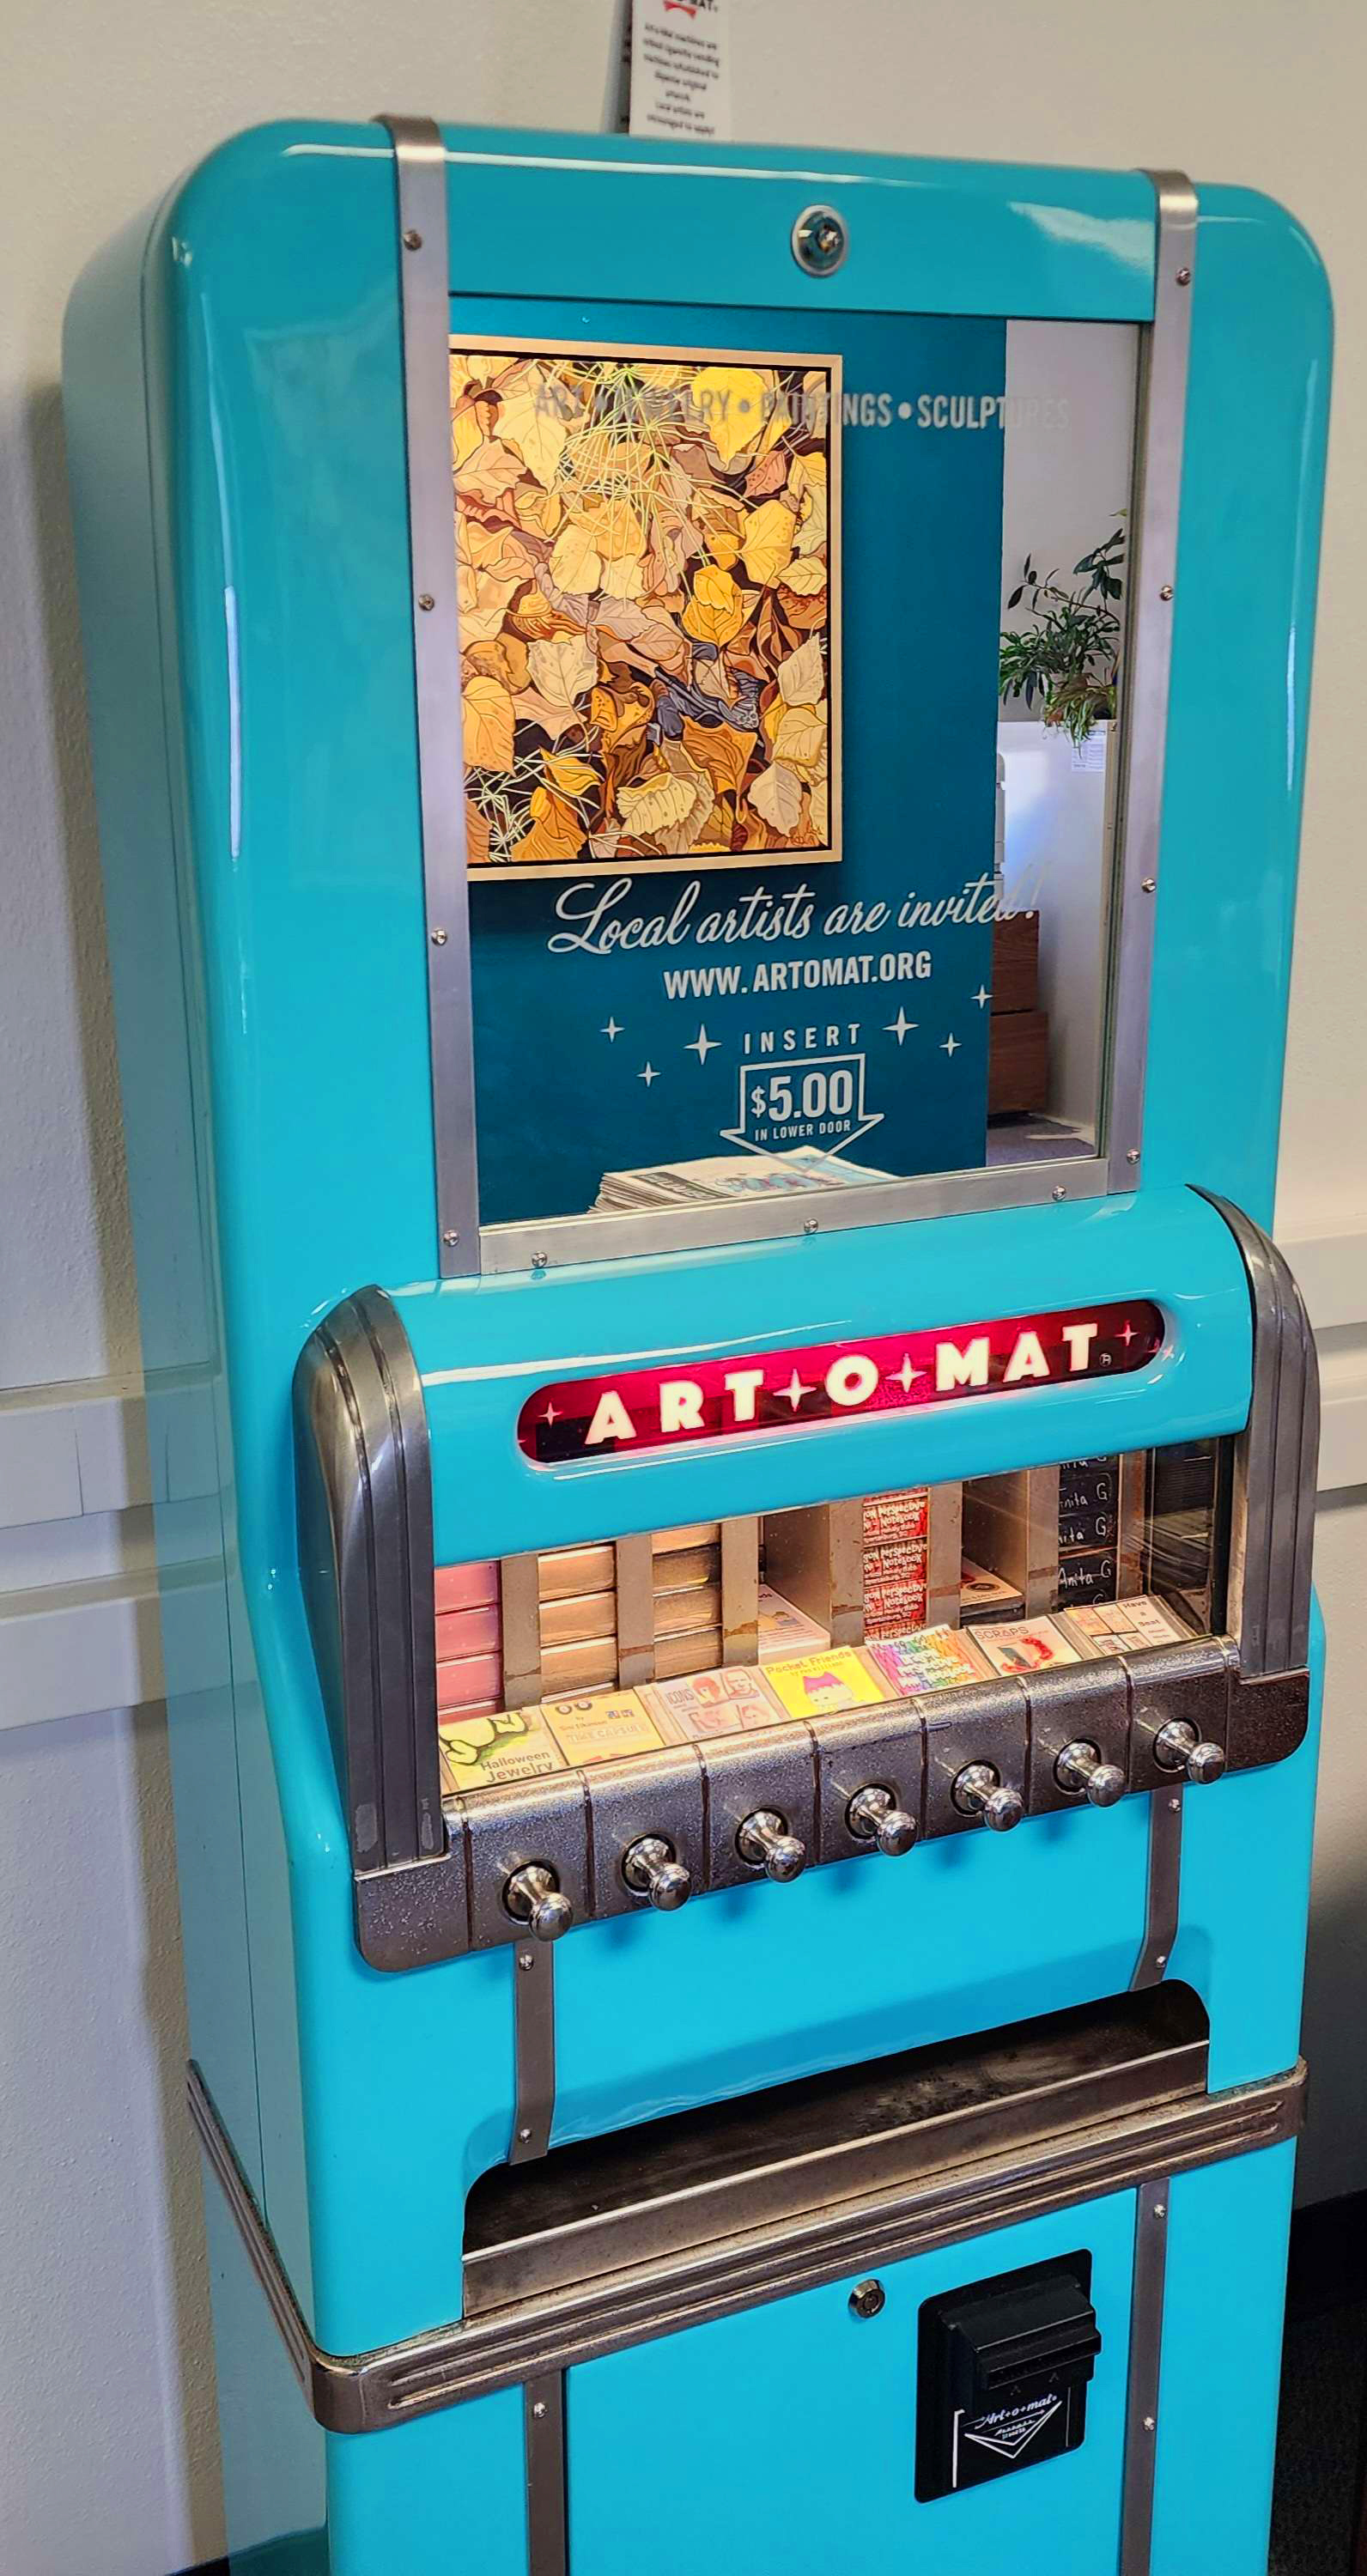 Art-O-Mat machine featuring small works of art for sale.